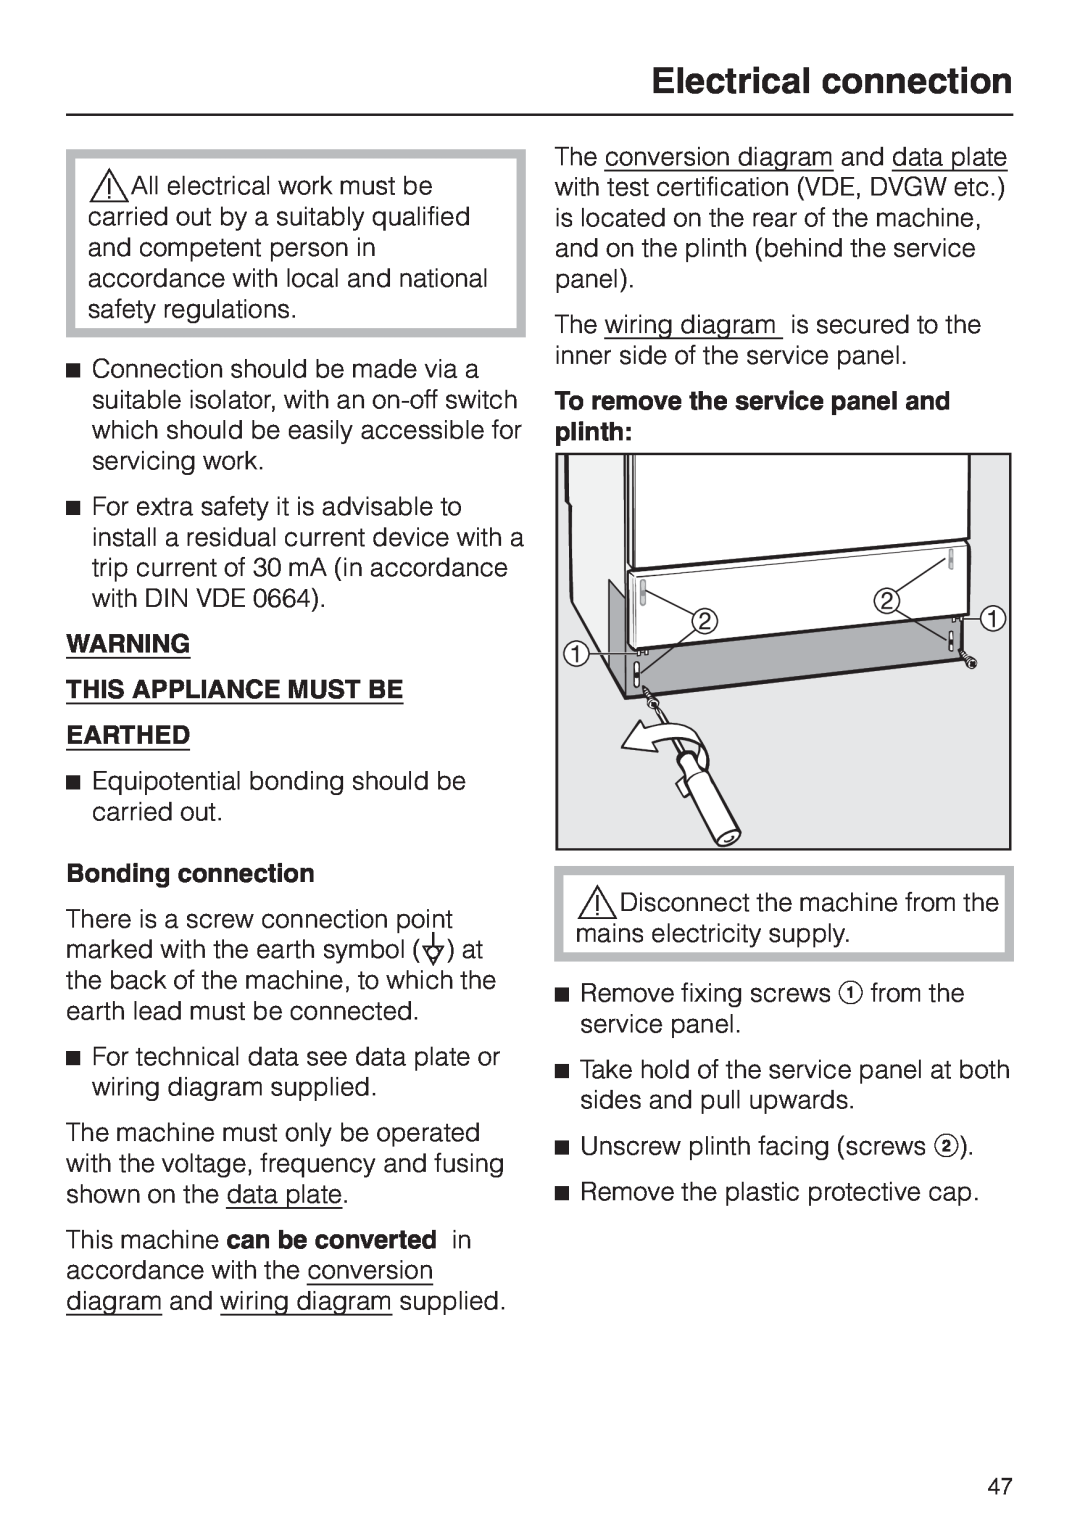 Miele G 7860 operating instructions Electrical connection, This Appliance Must Be Earthed, Bonding connection 